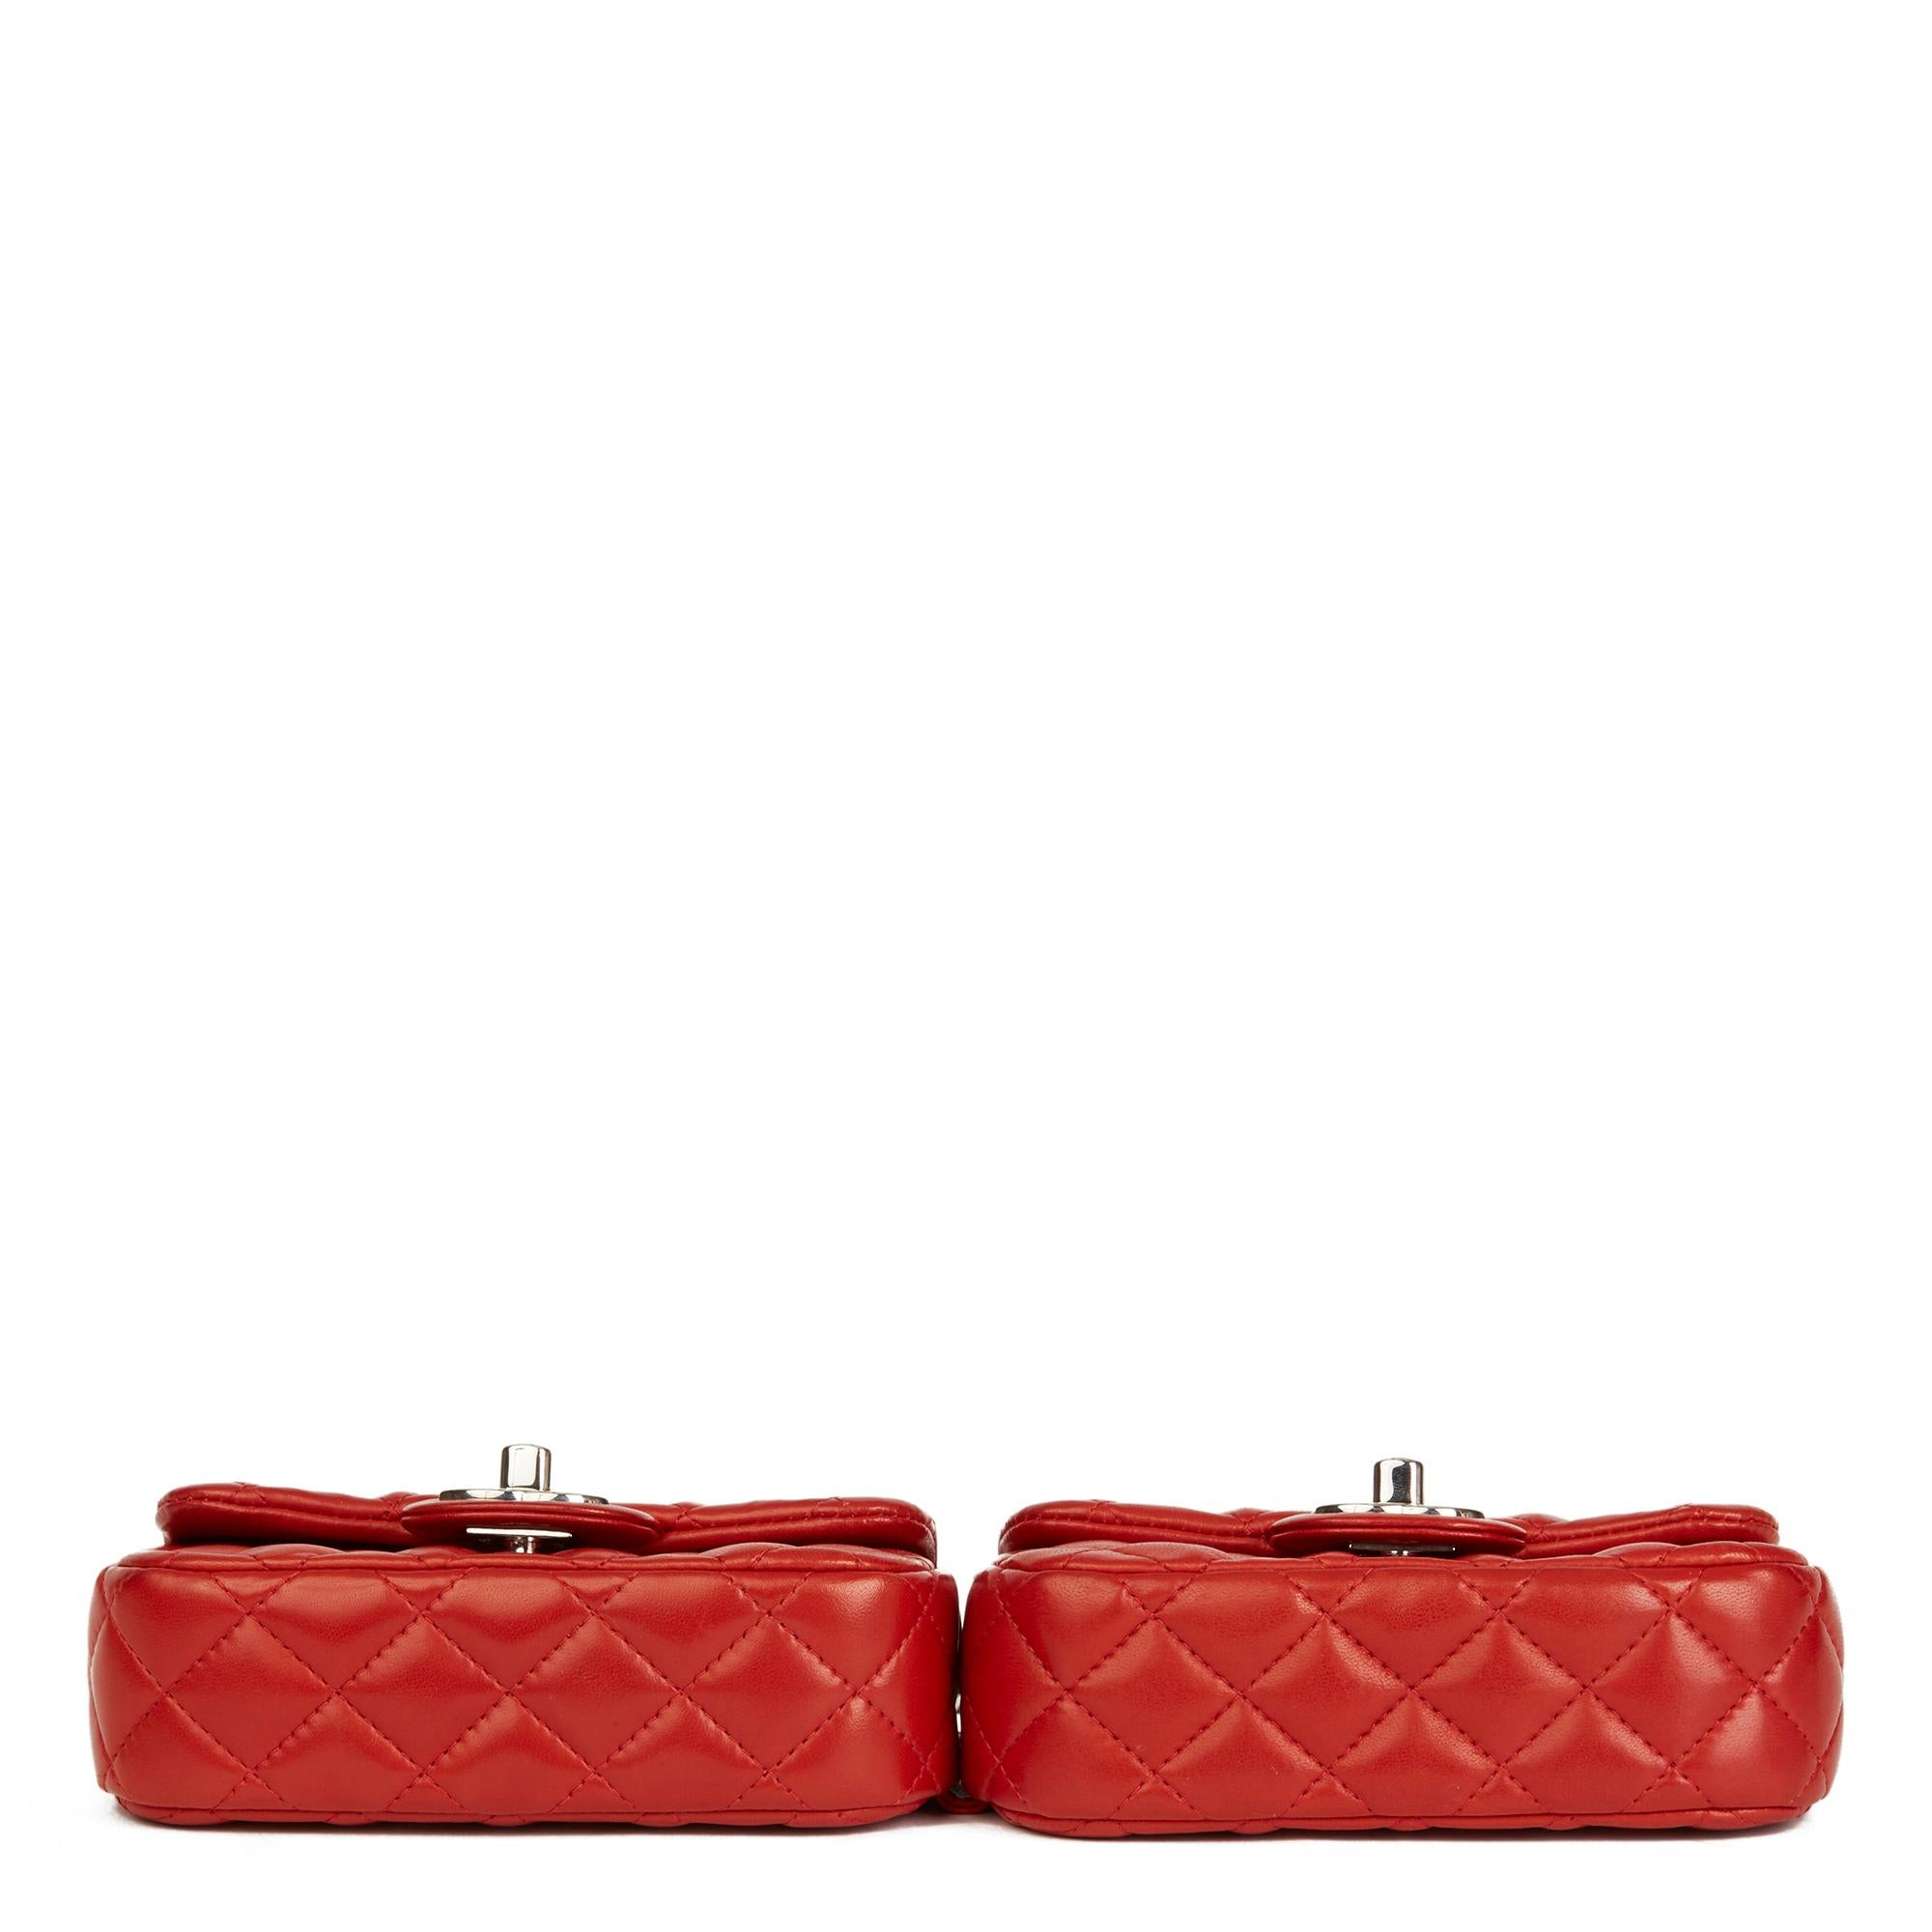 Women's 2011 Chanel Red Quilted Lambskin Double Mini Flap Bag